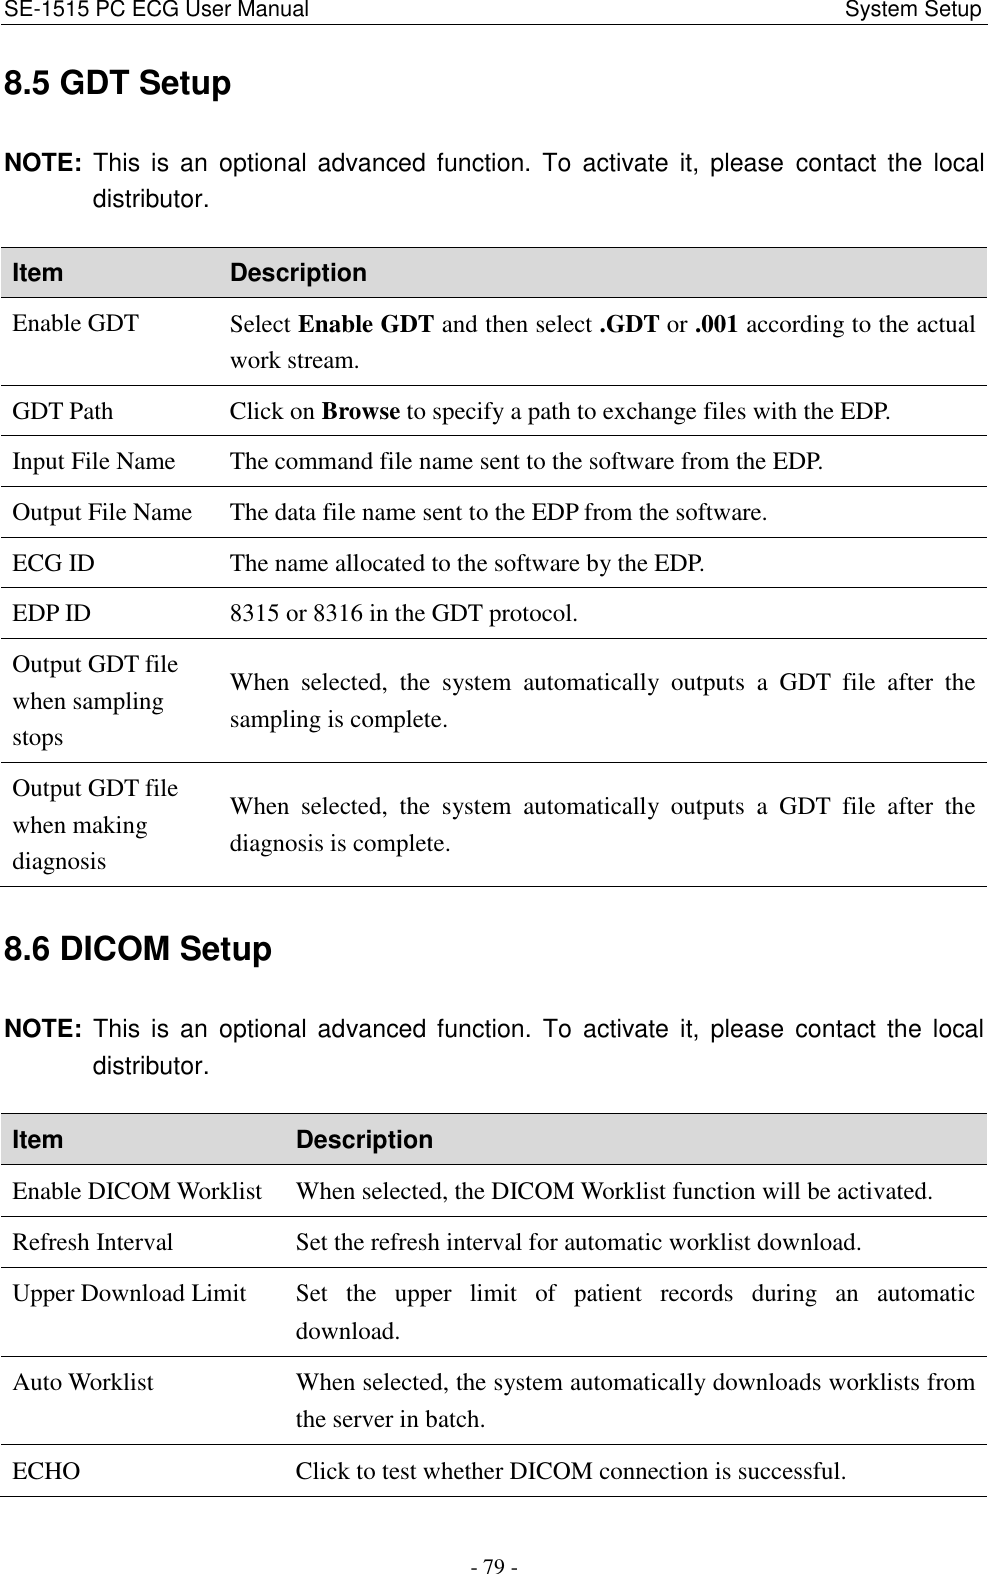 SE-1515 PC ECG User Manual                                                                                             System Setup - 79 - 8.5 GDT Setup NOTE:  This is  an  optional  advanced  function.  To  activate  it,  please  contact  the  local distributor. Item Description Enable GDT Select Enable GDT and then select .GDT or .001 according to the actual work stream. GDT Path Click on Browse to specify a path to exchange files with the EDP. Input File Name The command file name sent to the software from the EDP. Output File Name The data file name sent to the EDP from the software. ECG ID The name allocated to the software by the EDP. EDP ID 8315 or 8316 in the GDT protocol. Output GDT file when sampling stops When  selected,  the  system  automatically  outputs  a  GDT  file  after  the sampling is complete. Output GDT file when making diagnosis When  selected,  the  system  automatically  outputs  a  GDT  file  after  the diagnosis is complete. 8.6 DICOM Setup NOTE:  This is  an  optional  advanced function.  To  activate it,  please  contact  the  local distributor. Item Description Enable DICOM Worklist When selected, the DICOM Worklist function will be activated. Refresh Interval Set the refresh interval for automatic worklist download. Upper Download Limit Set  the  upper  limit  of  patient  records  during  an  automatic download. Auto Worklist When selected, the system automatically downloads worklists from the server in batch. ECHO Click to test whether DICOM connection is successful. 